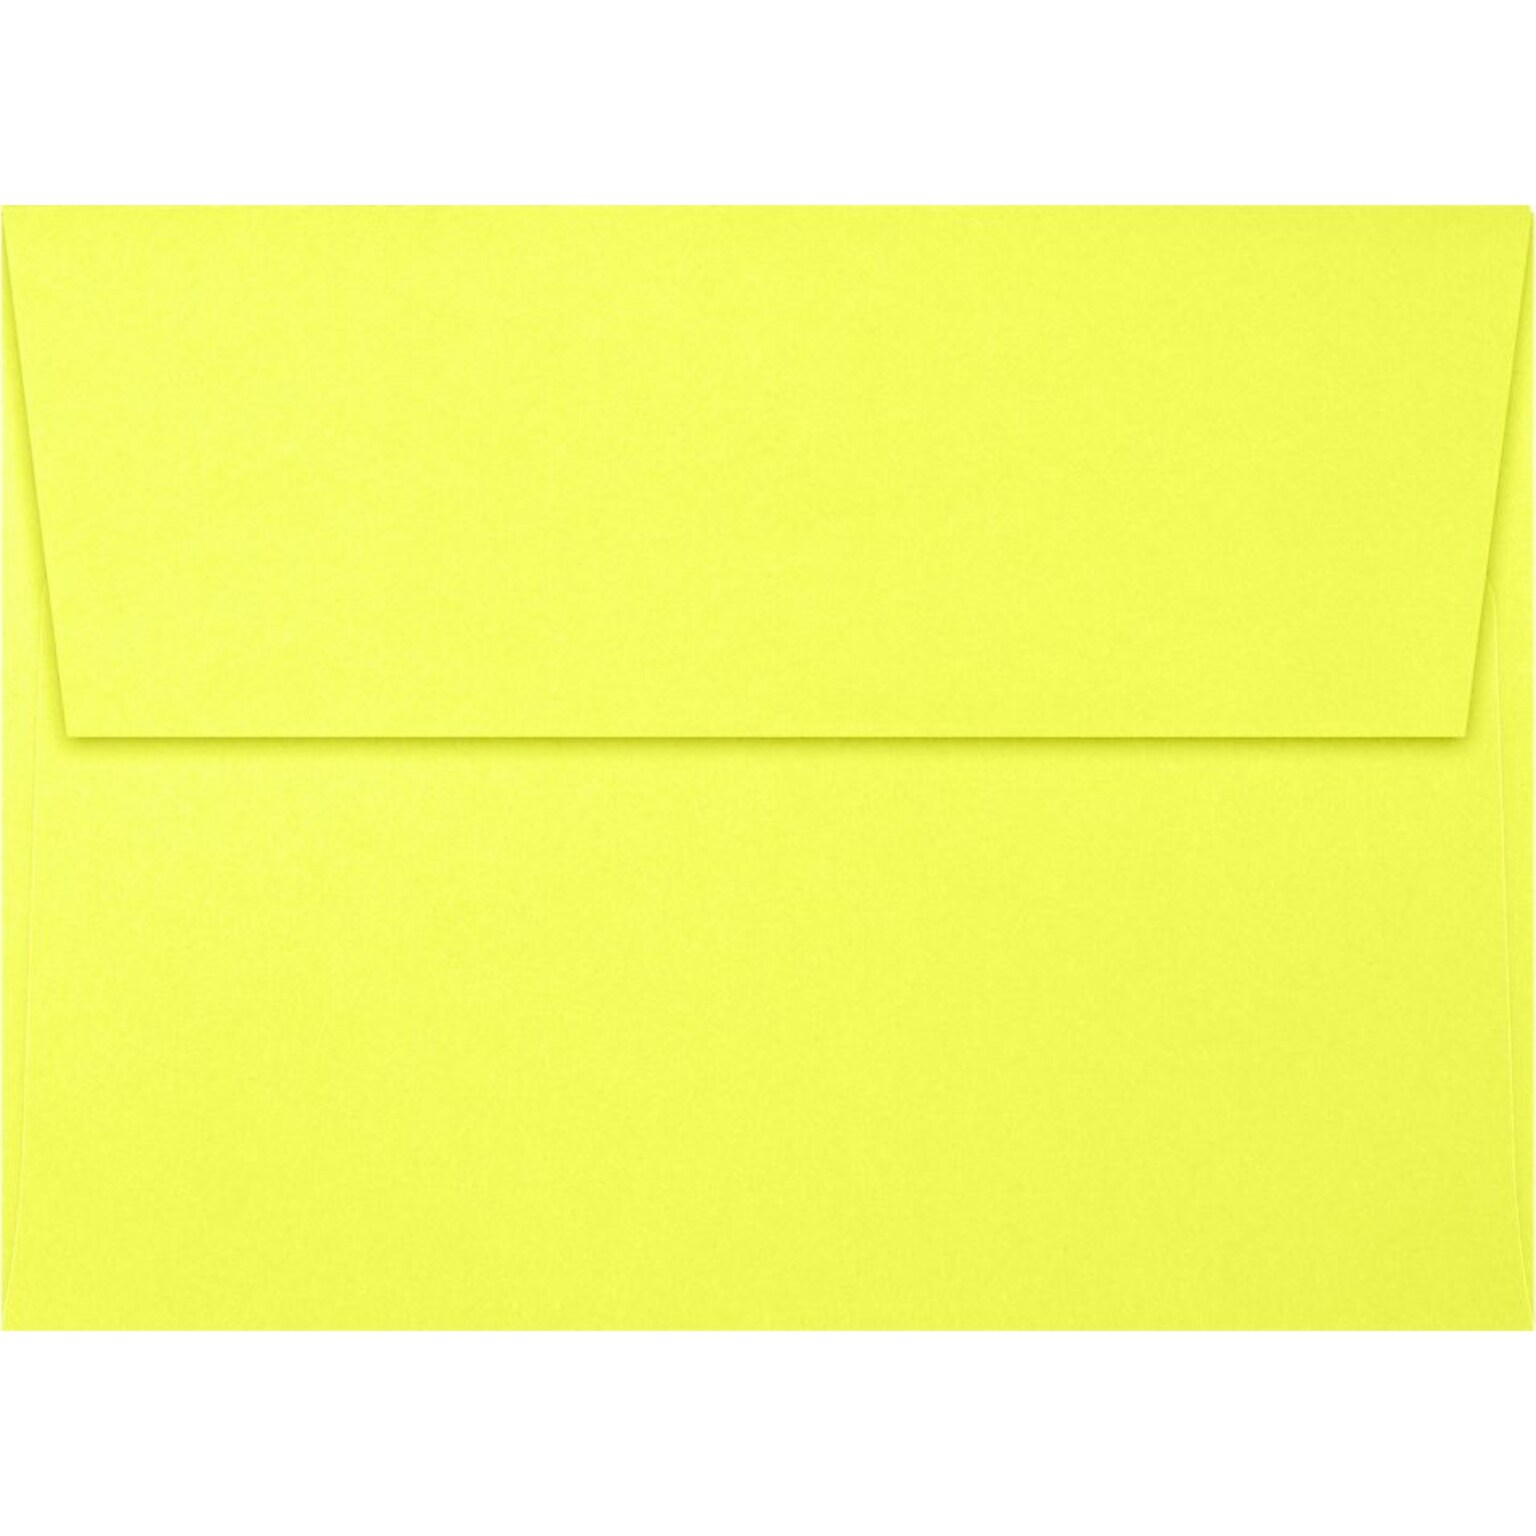 LUX A7 Invitation Envelopes (5 1/4 x 7 1/4) 1000/Pack, Electric Yellow (4880-ULEM-1000)